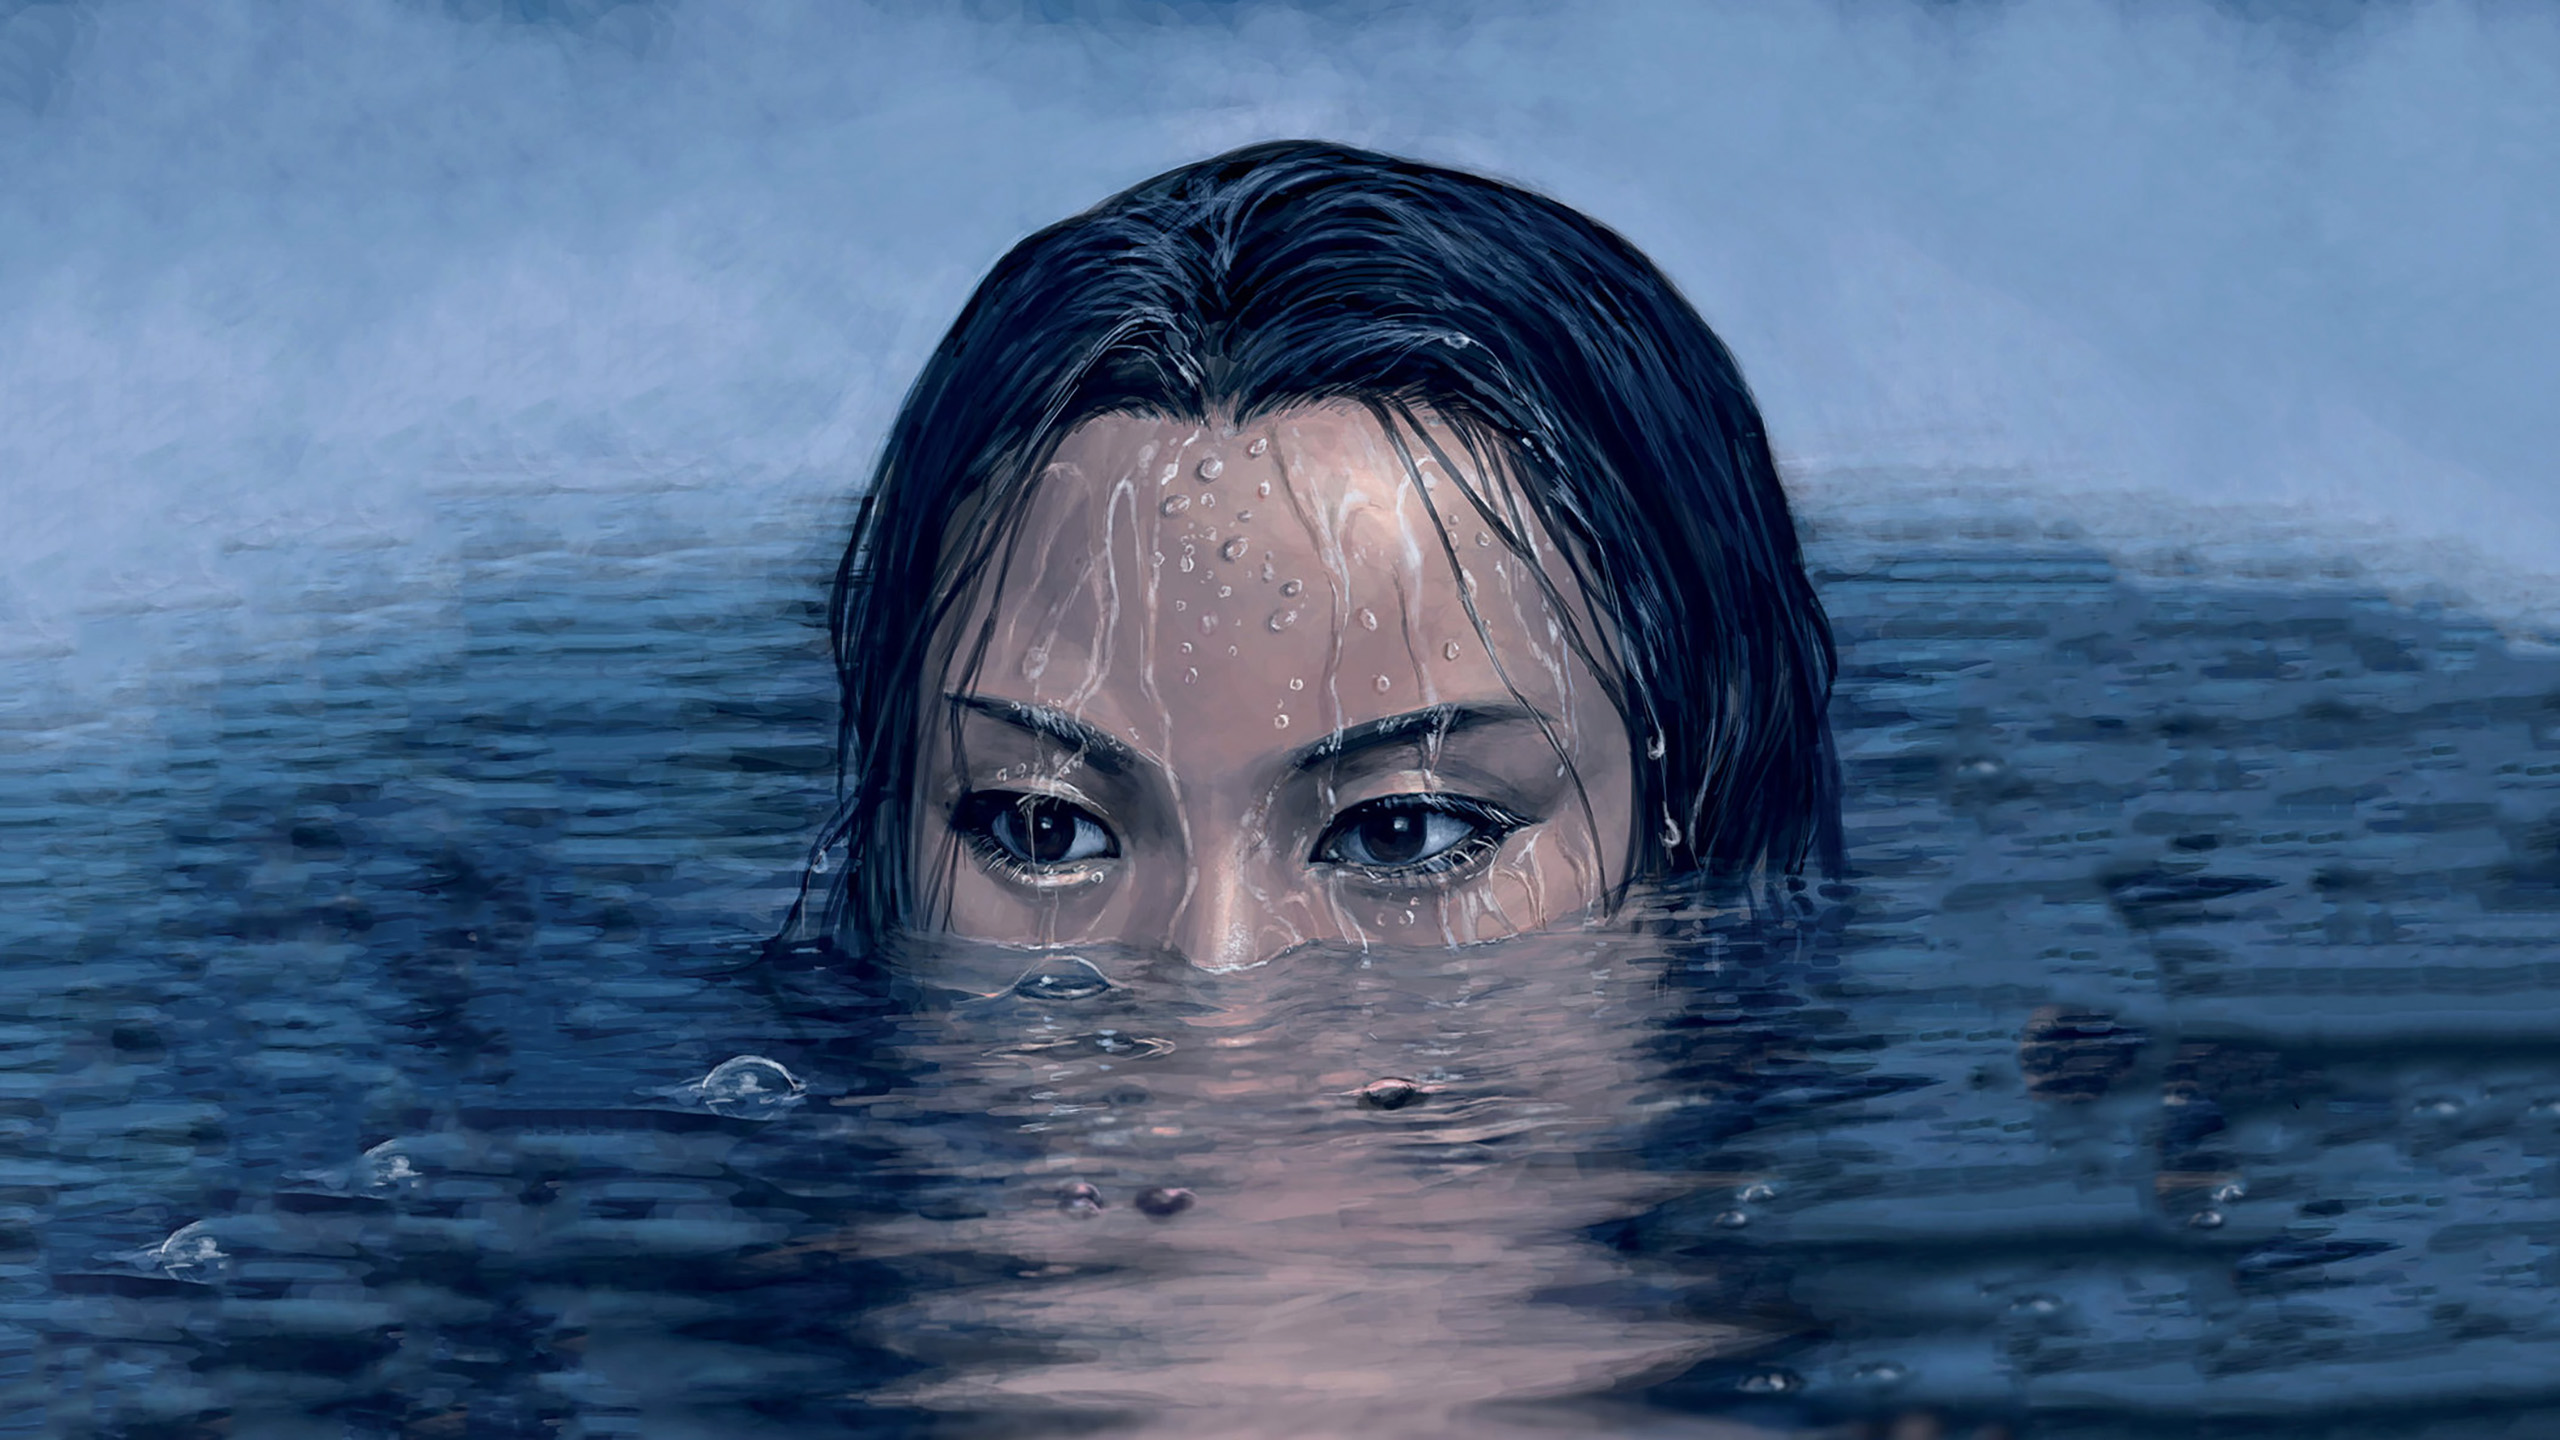 General 2560x1440 painting wormrot Asian water eyes album covers in water